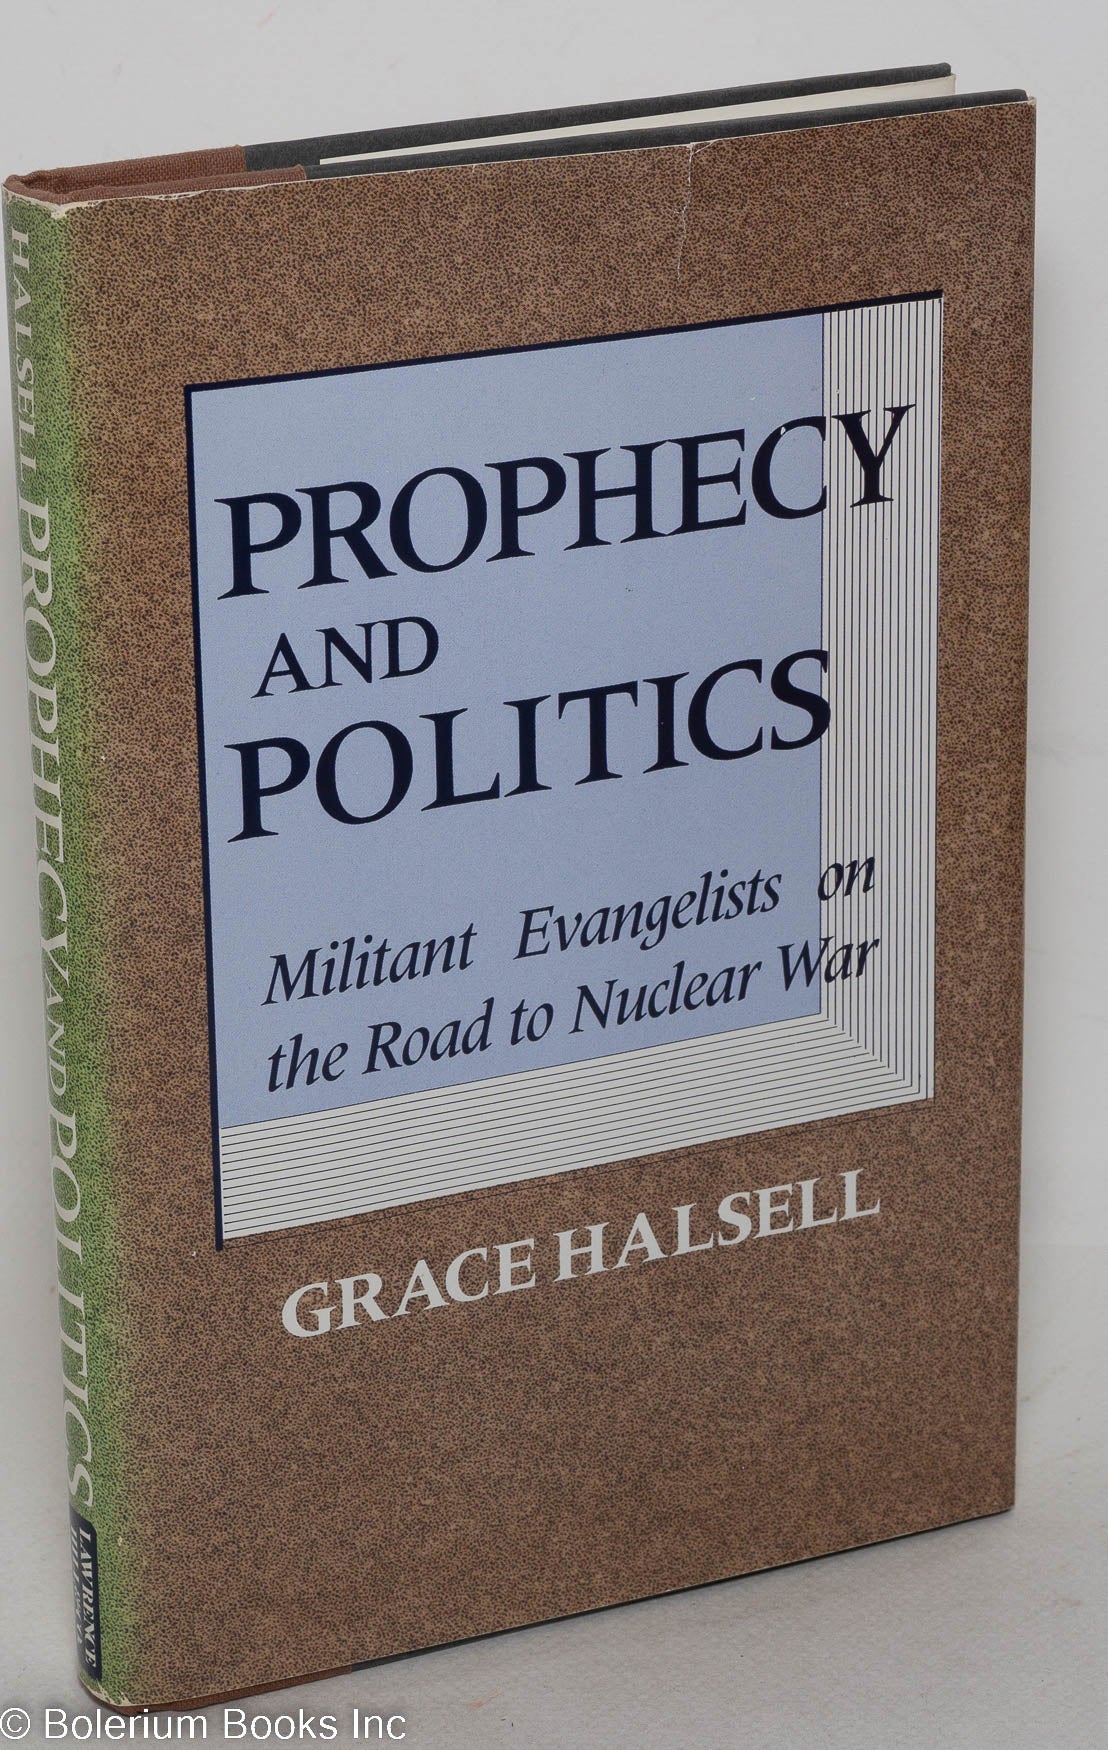 Prophecy and politics; militant evangelists on the road to nuclear